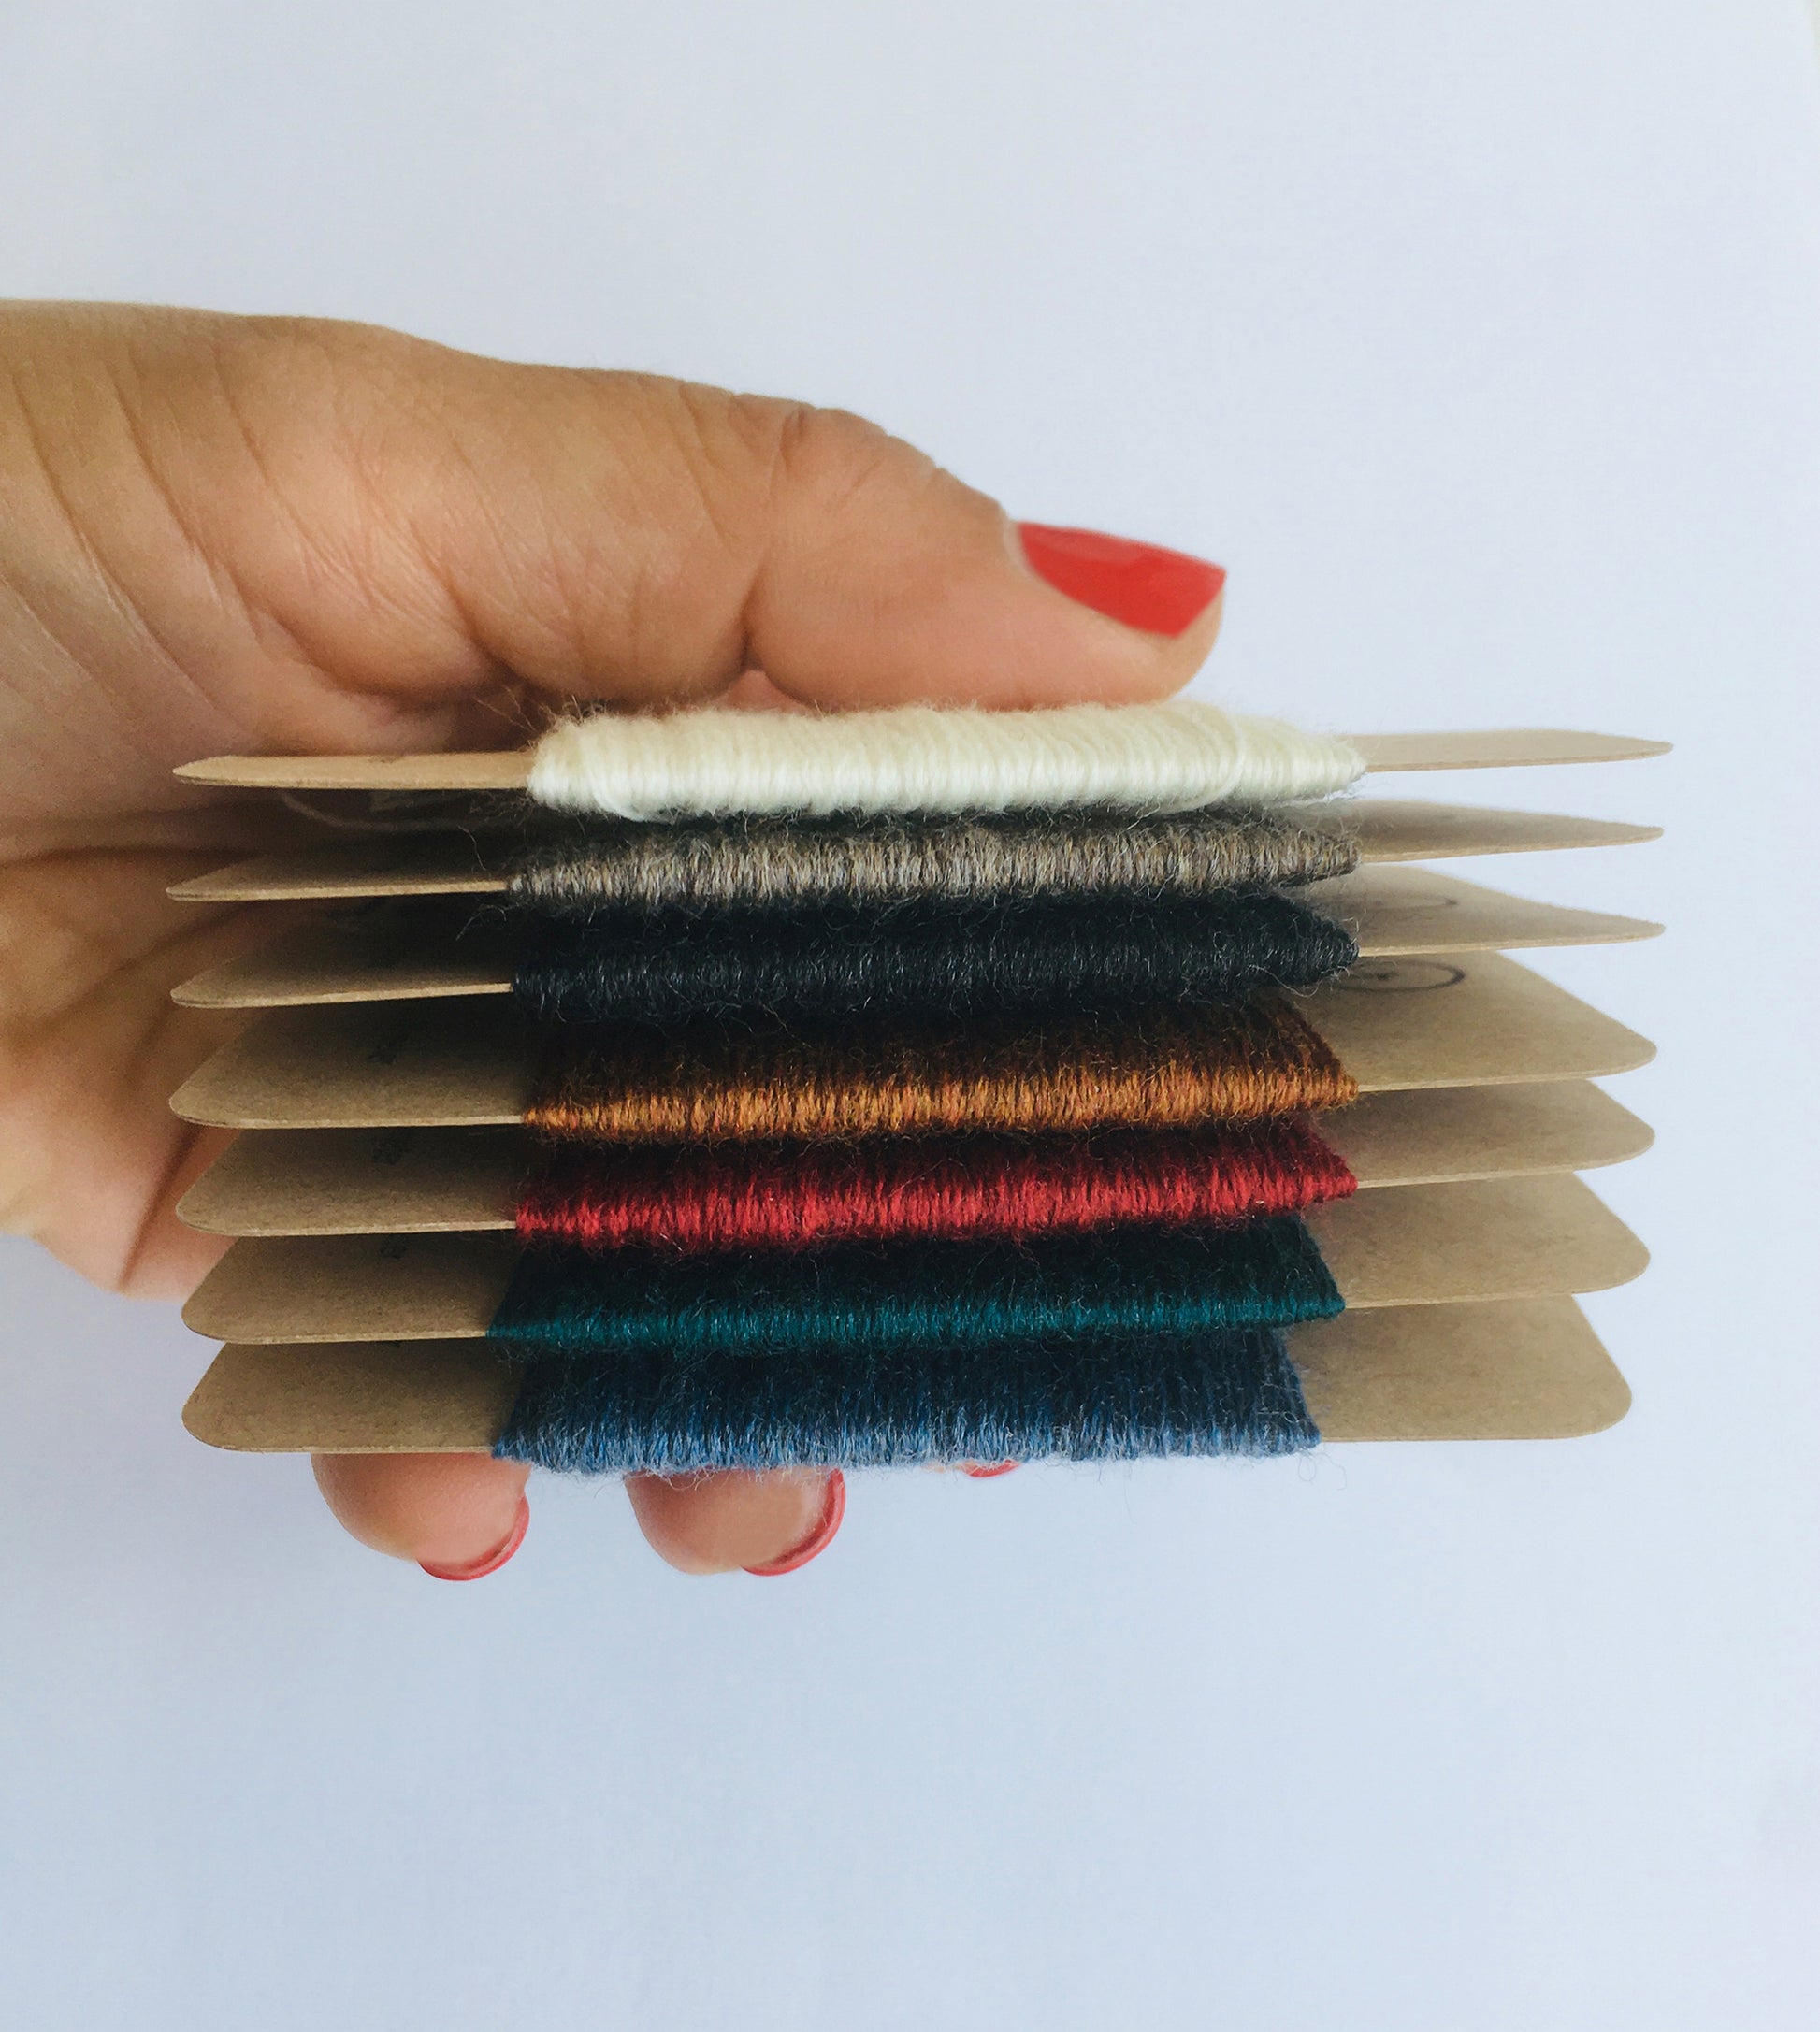 toolly offers darning yarns in 9 essential colors. They are 100% pure wool without any artificial fiber. 30 meter yarn is wound around kraft paper card. Set of 3 colors and 7 colors can be also purchased.